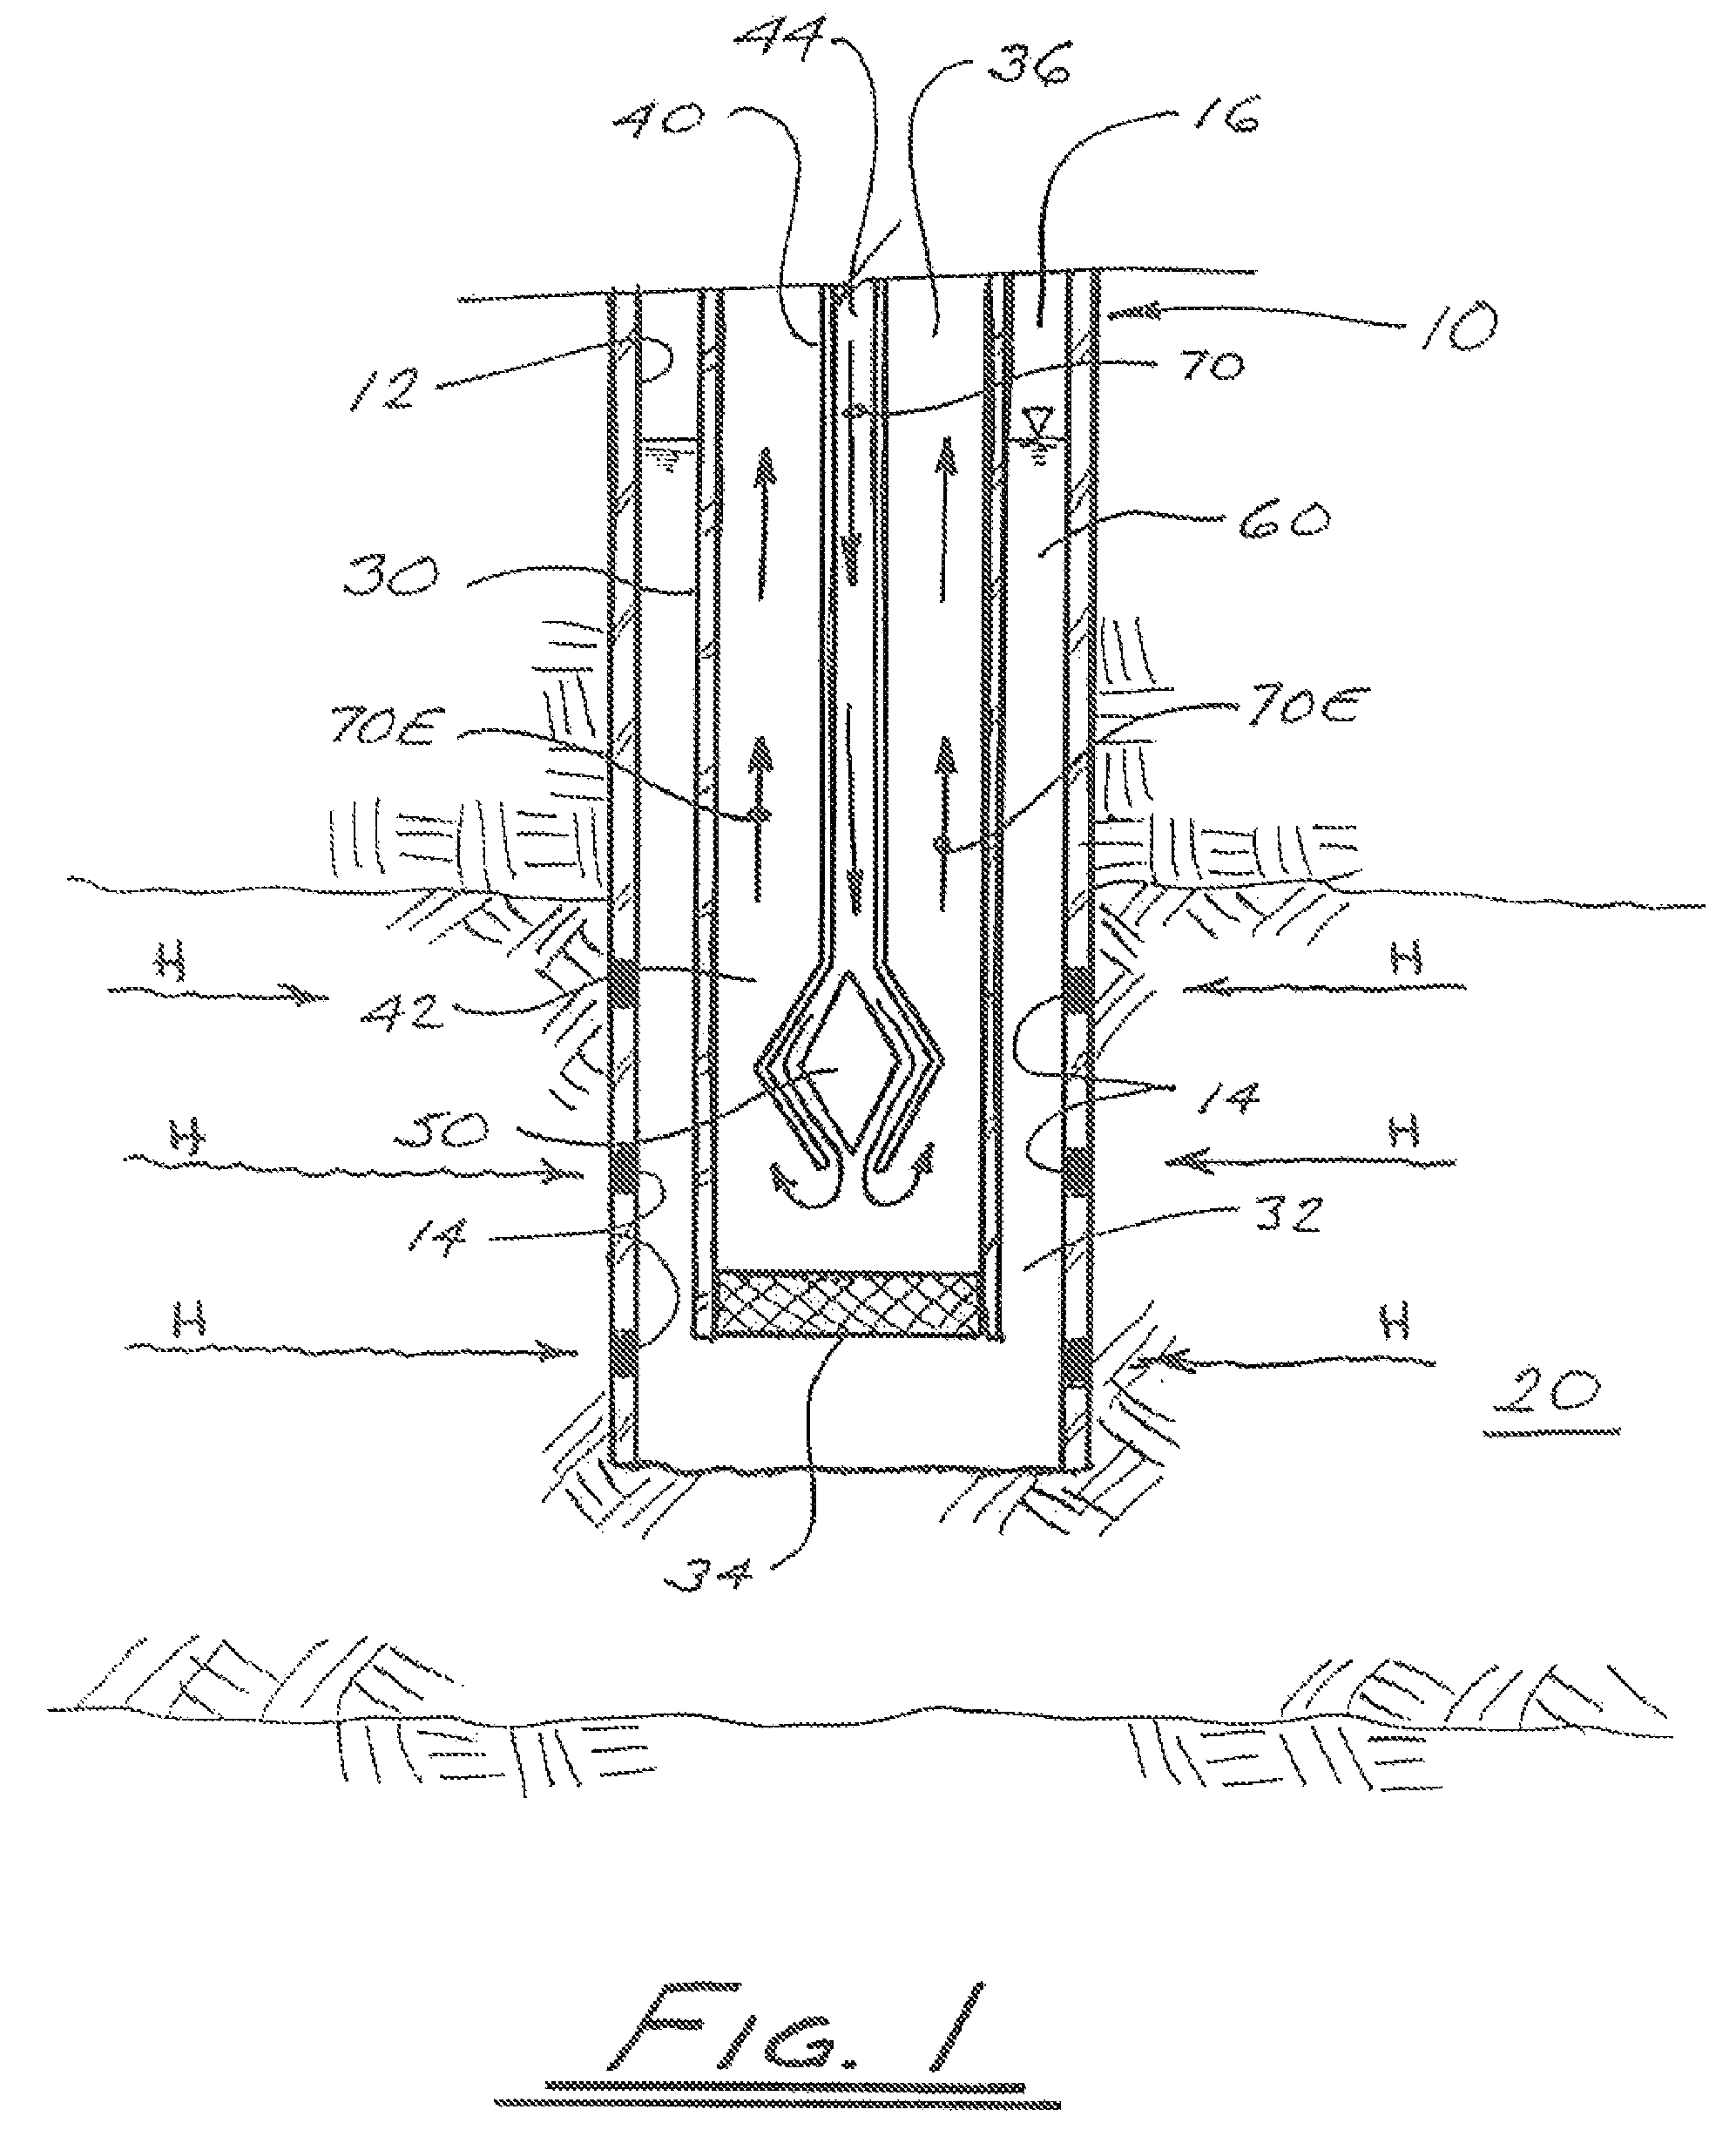 Method and apparatus for stimulating production from oil and gas wells by freeze-thaw cycling